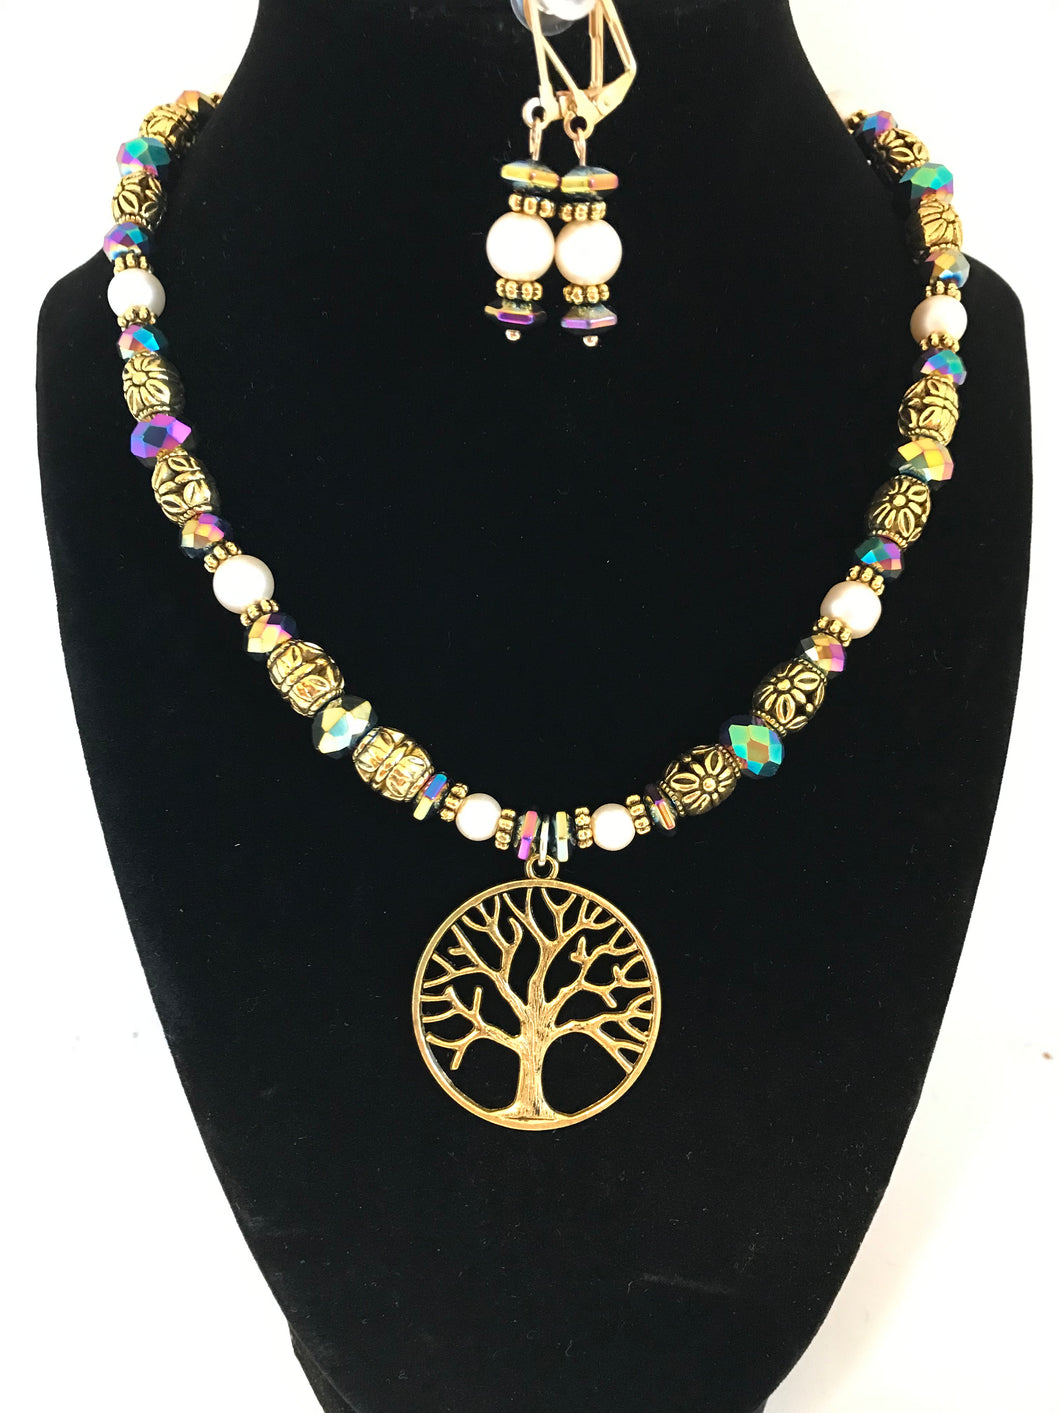 Tree of Life necklace with matching earrings